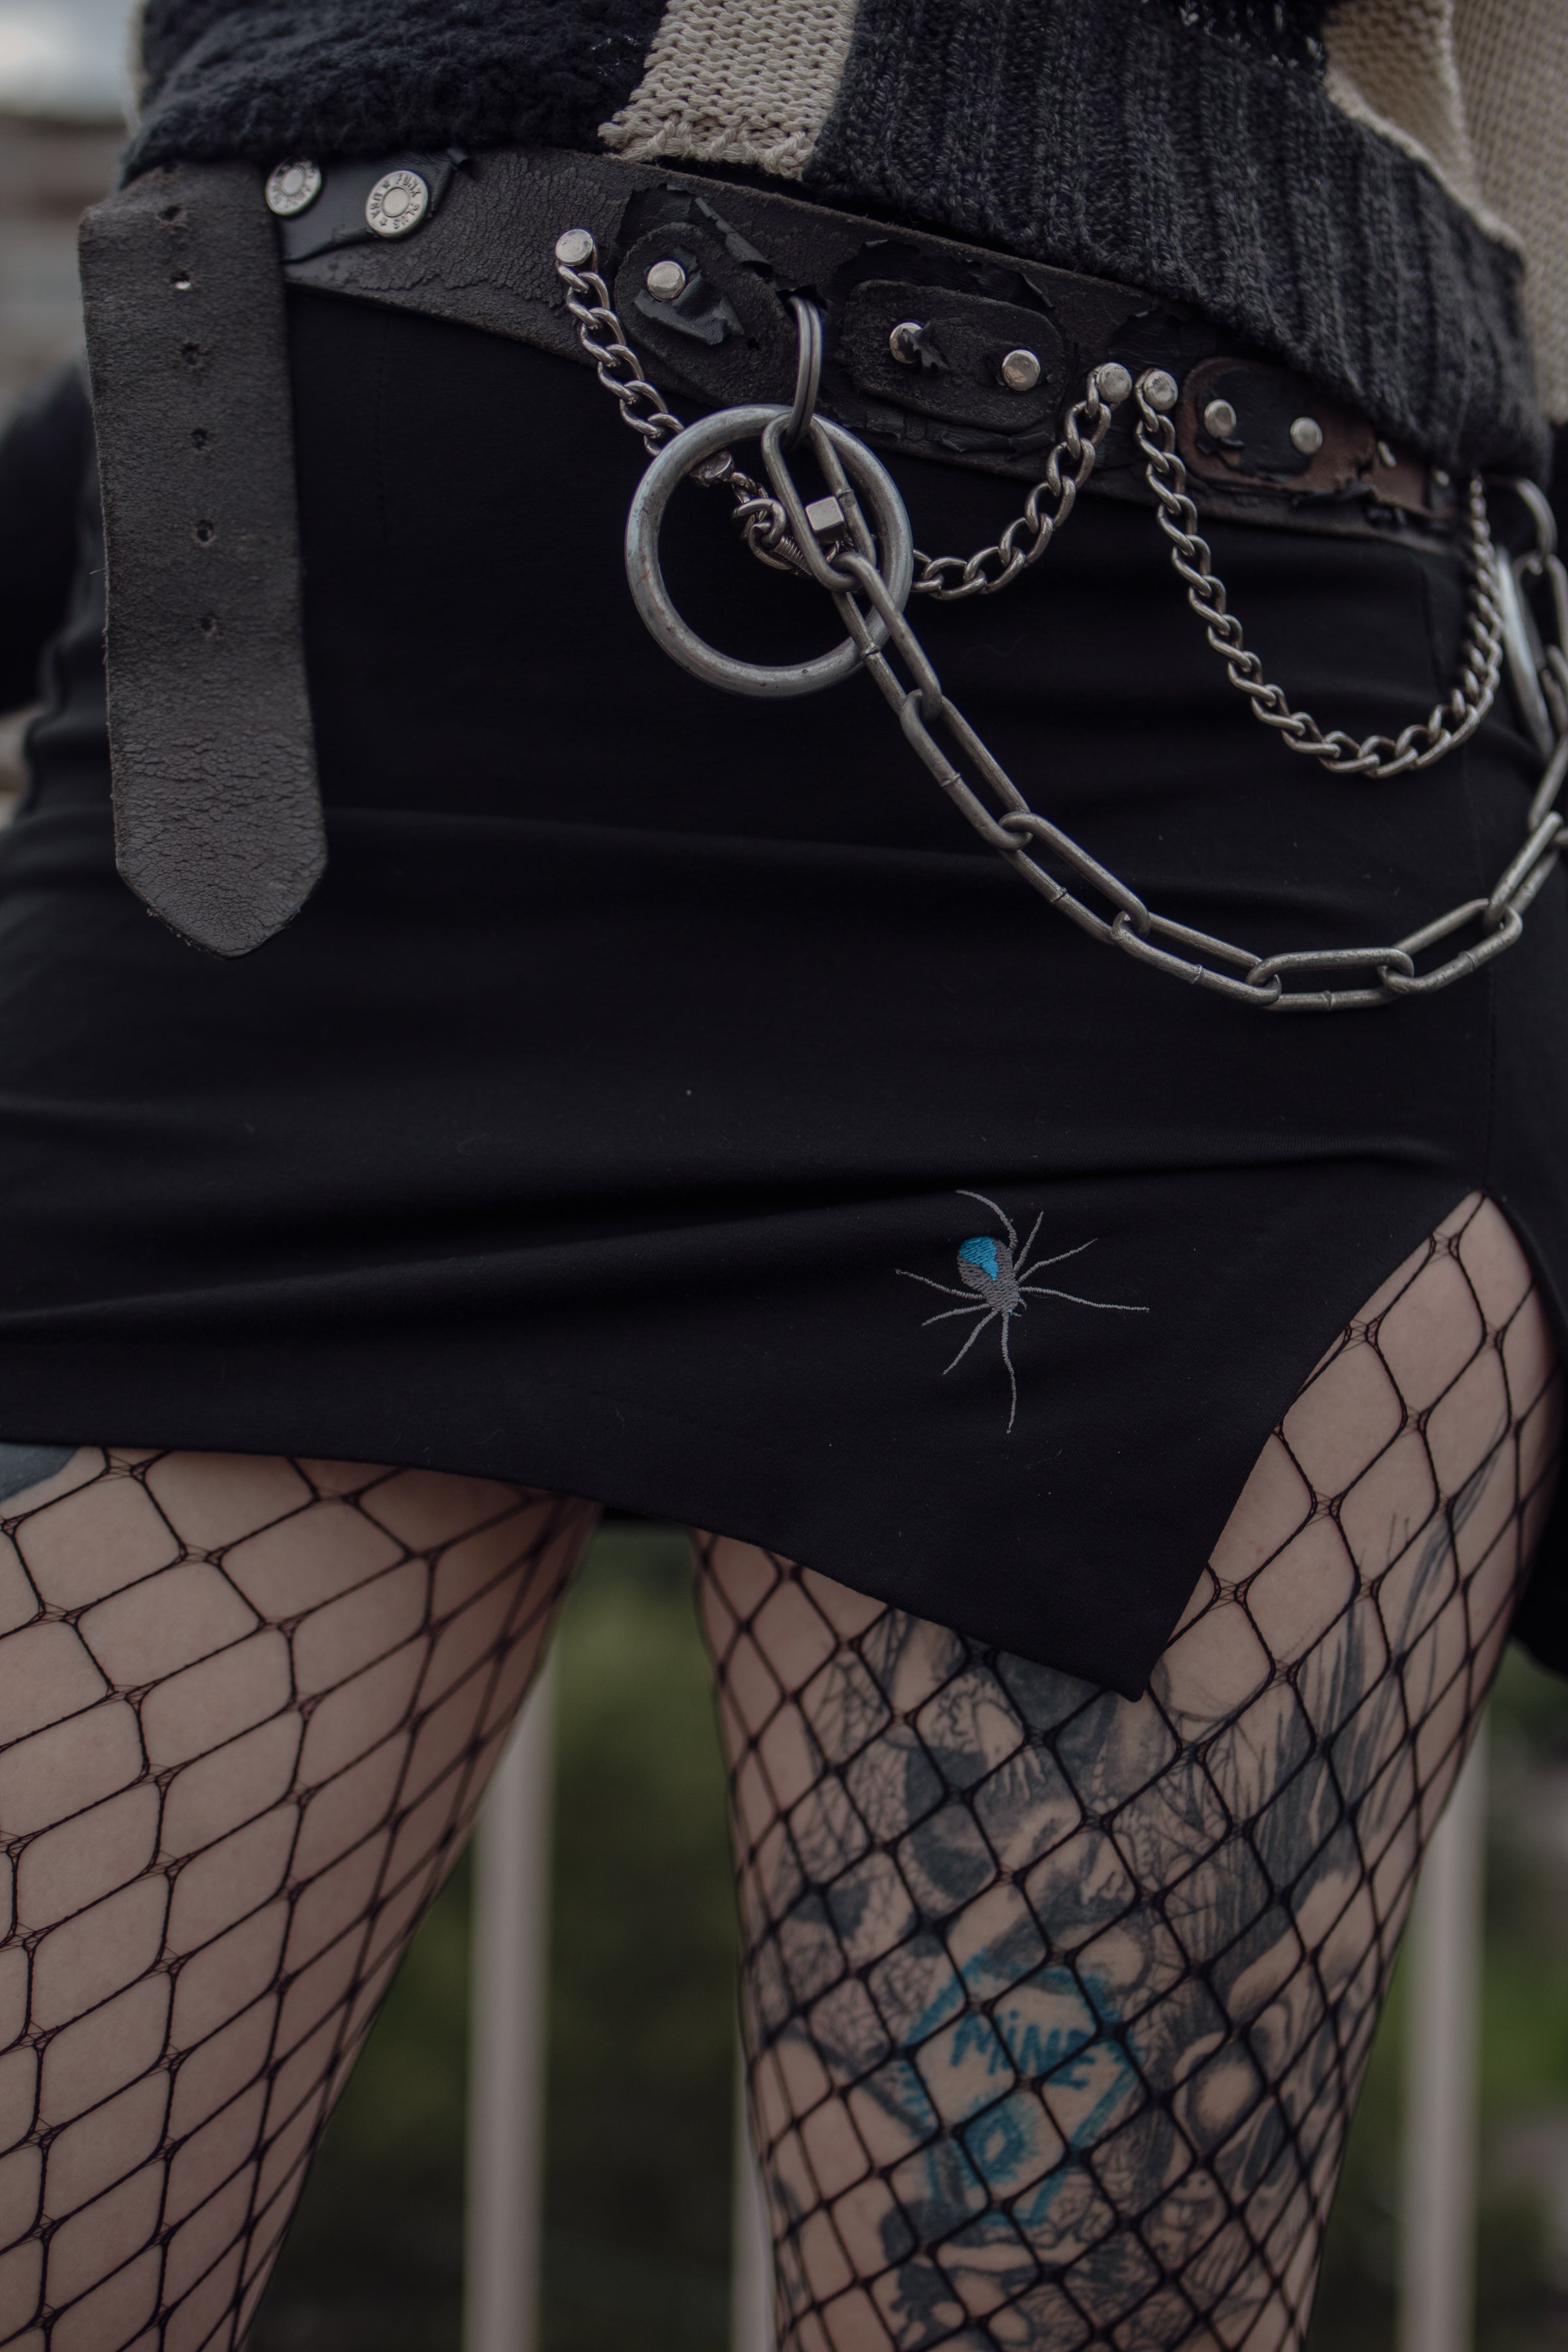 Upcycled Black Mini Skirt with Spider